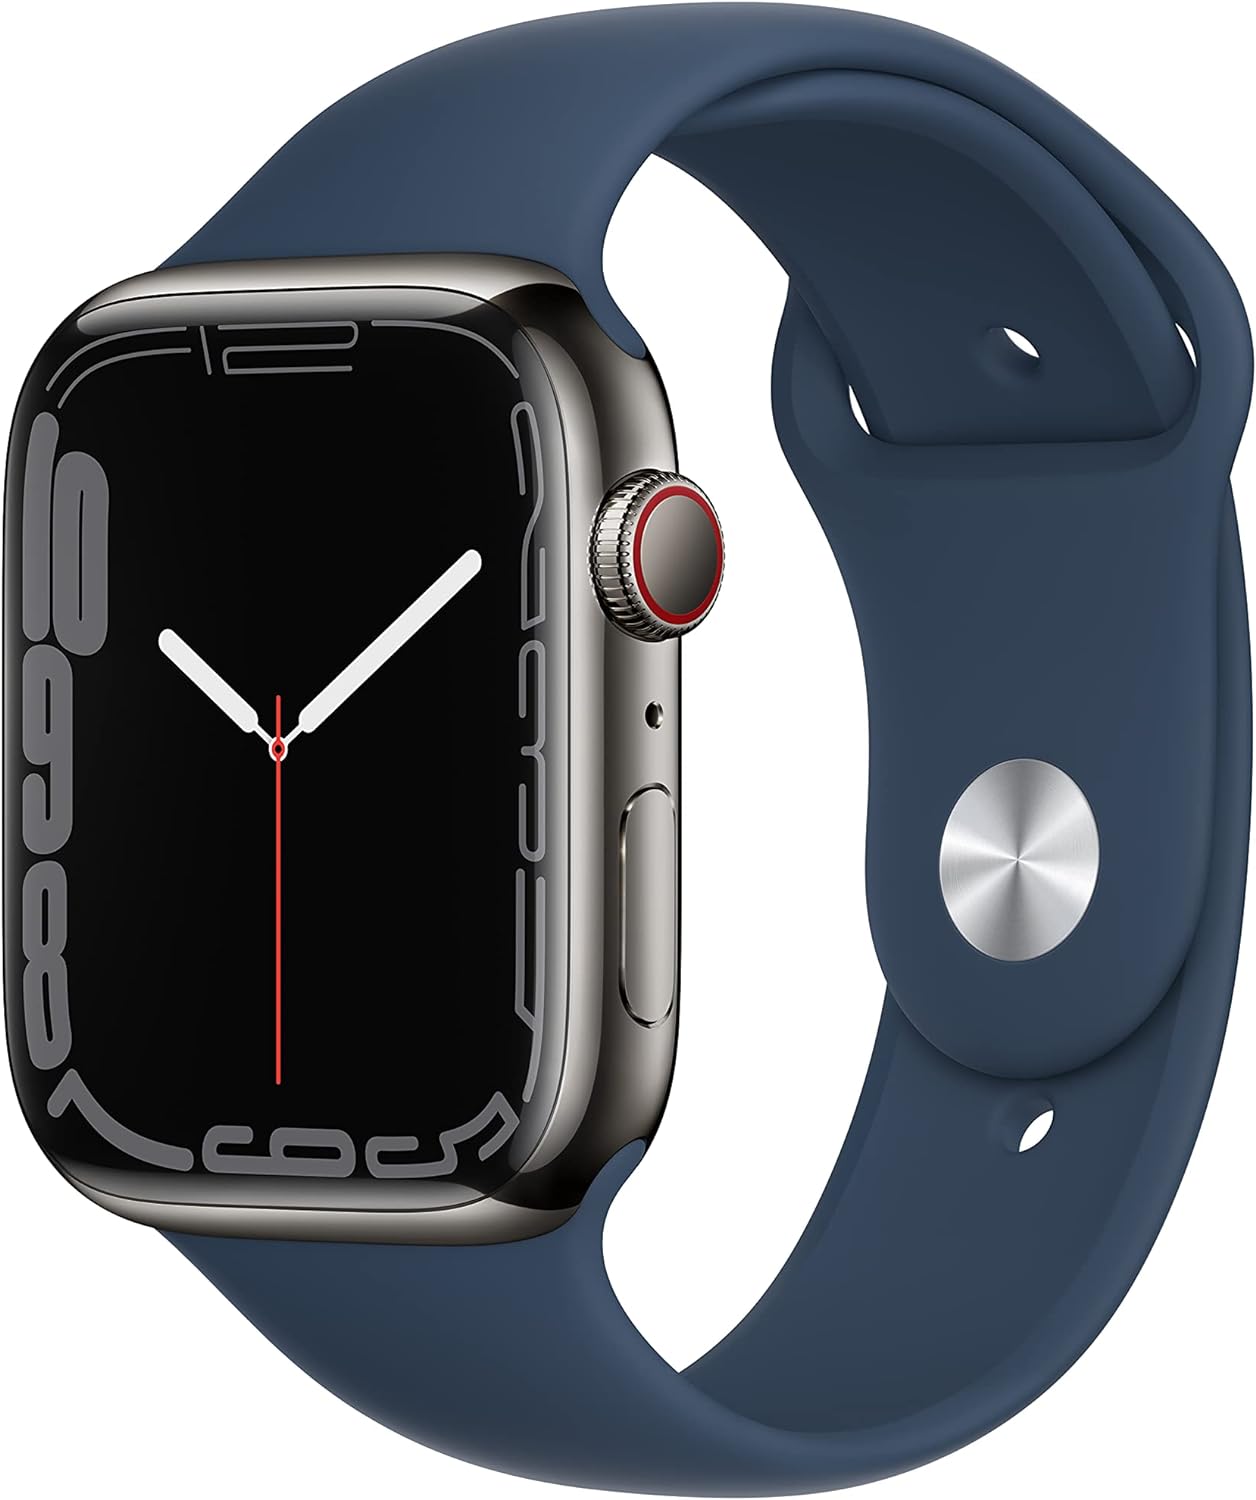 Apple Watch Series 7 [GPS + Cellular 45mm] Smart Watch w/Graphite Stainless Steel Case with Abyss Blue Sport Band. $362 - 20% coupon (YMMV)